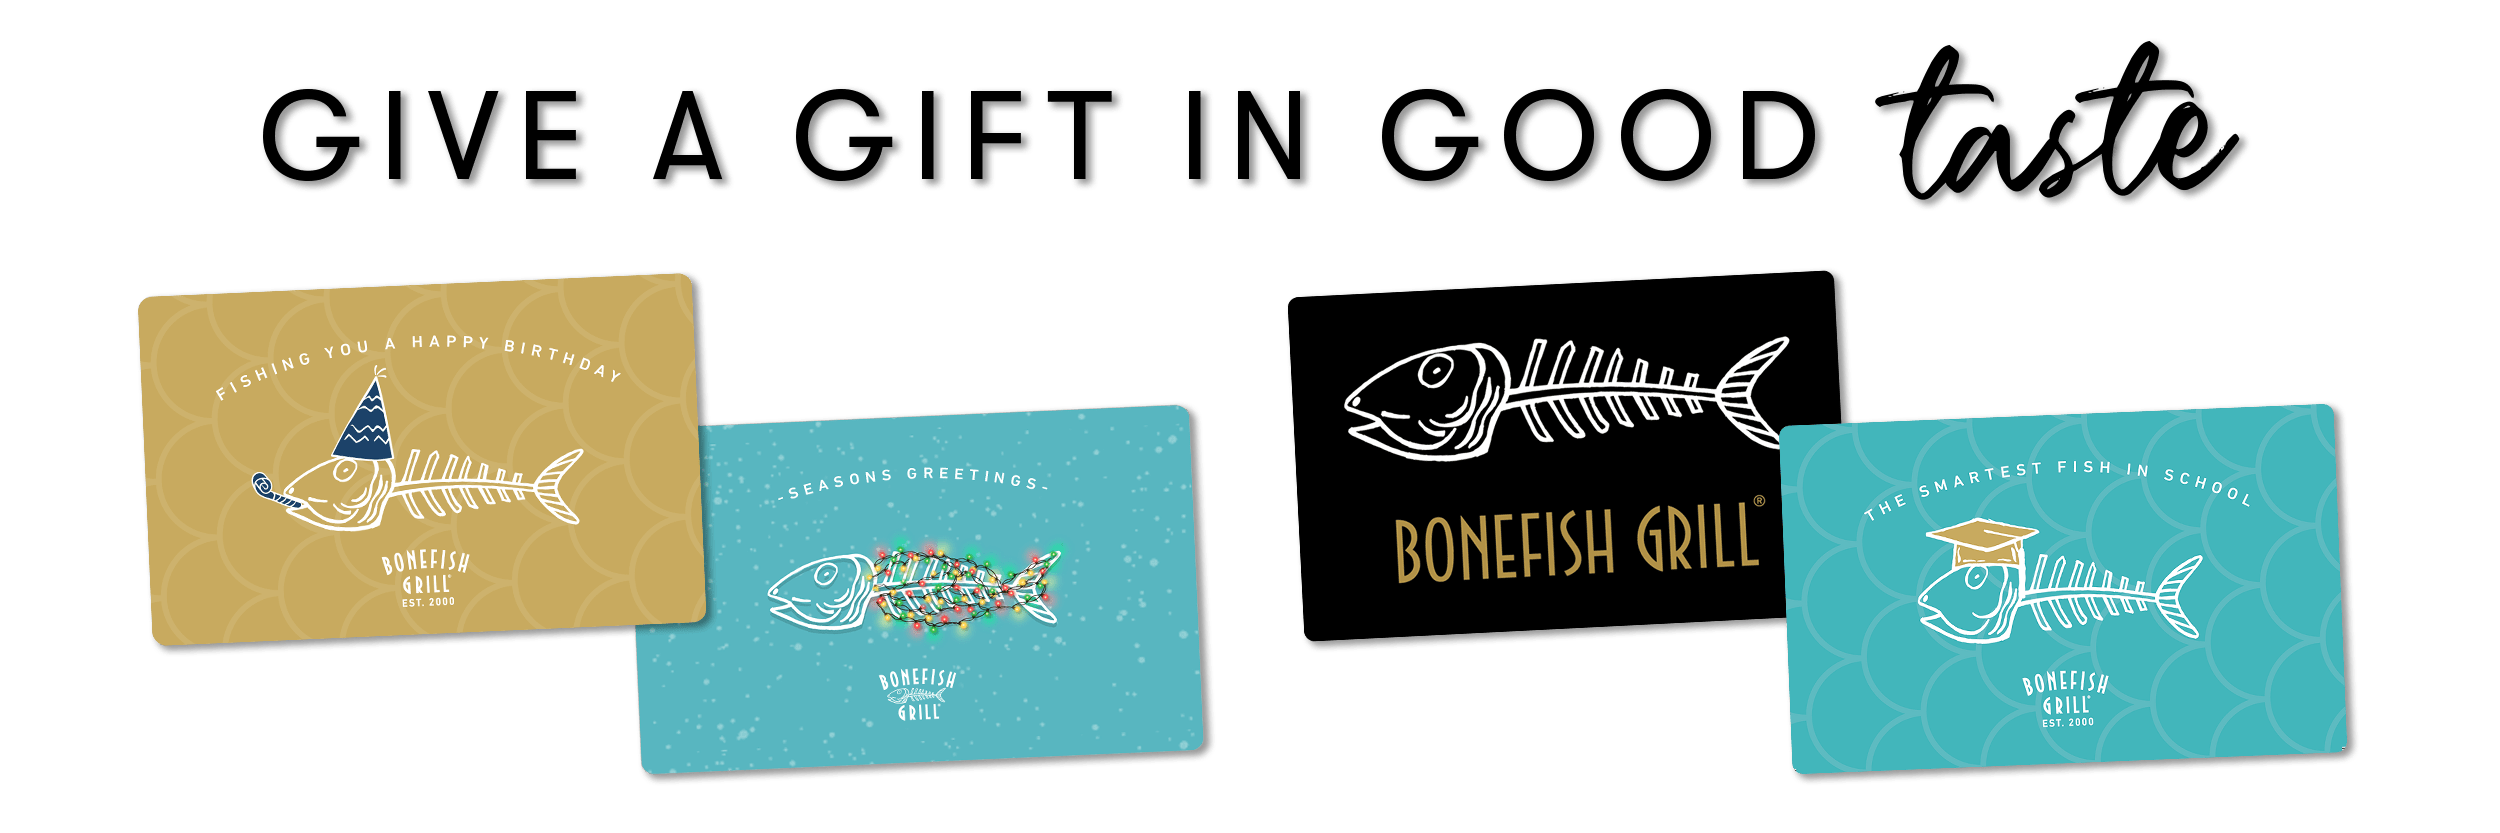 give a gift card in good taste